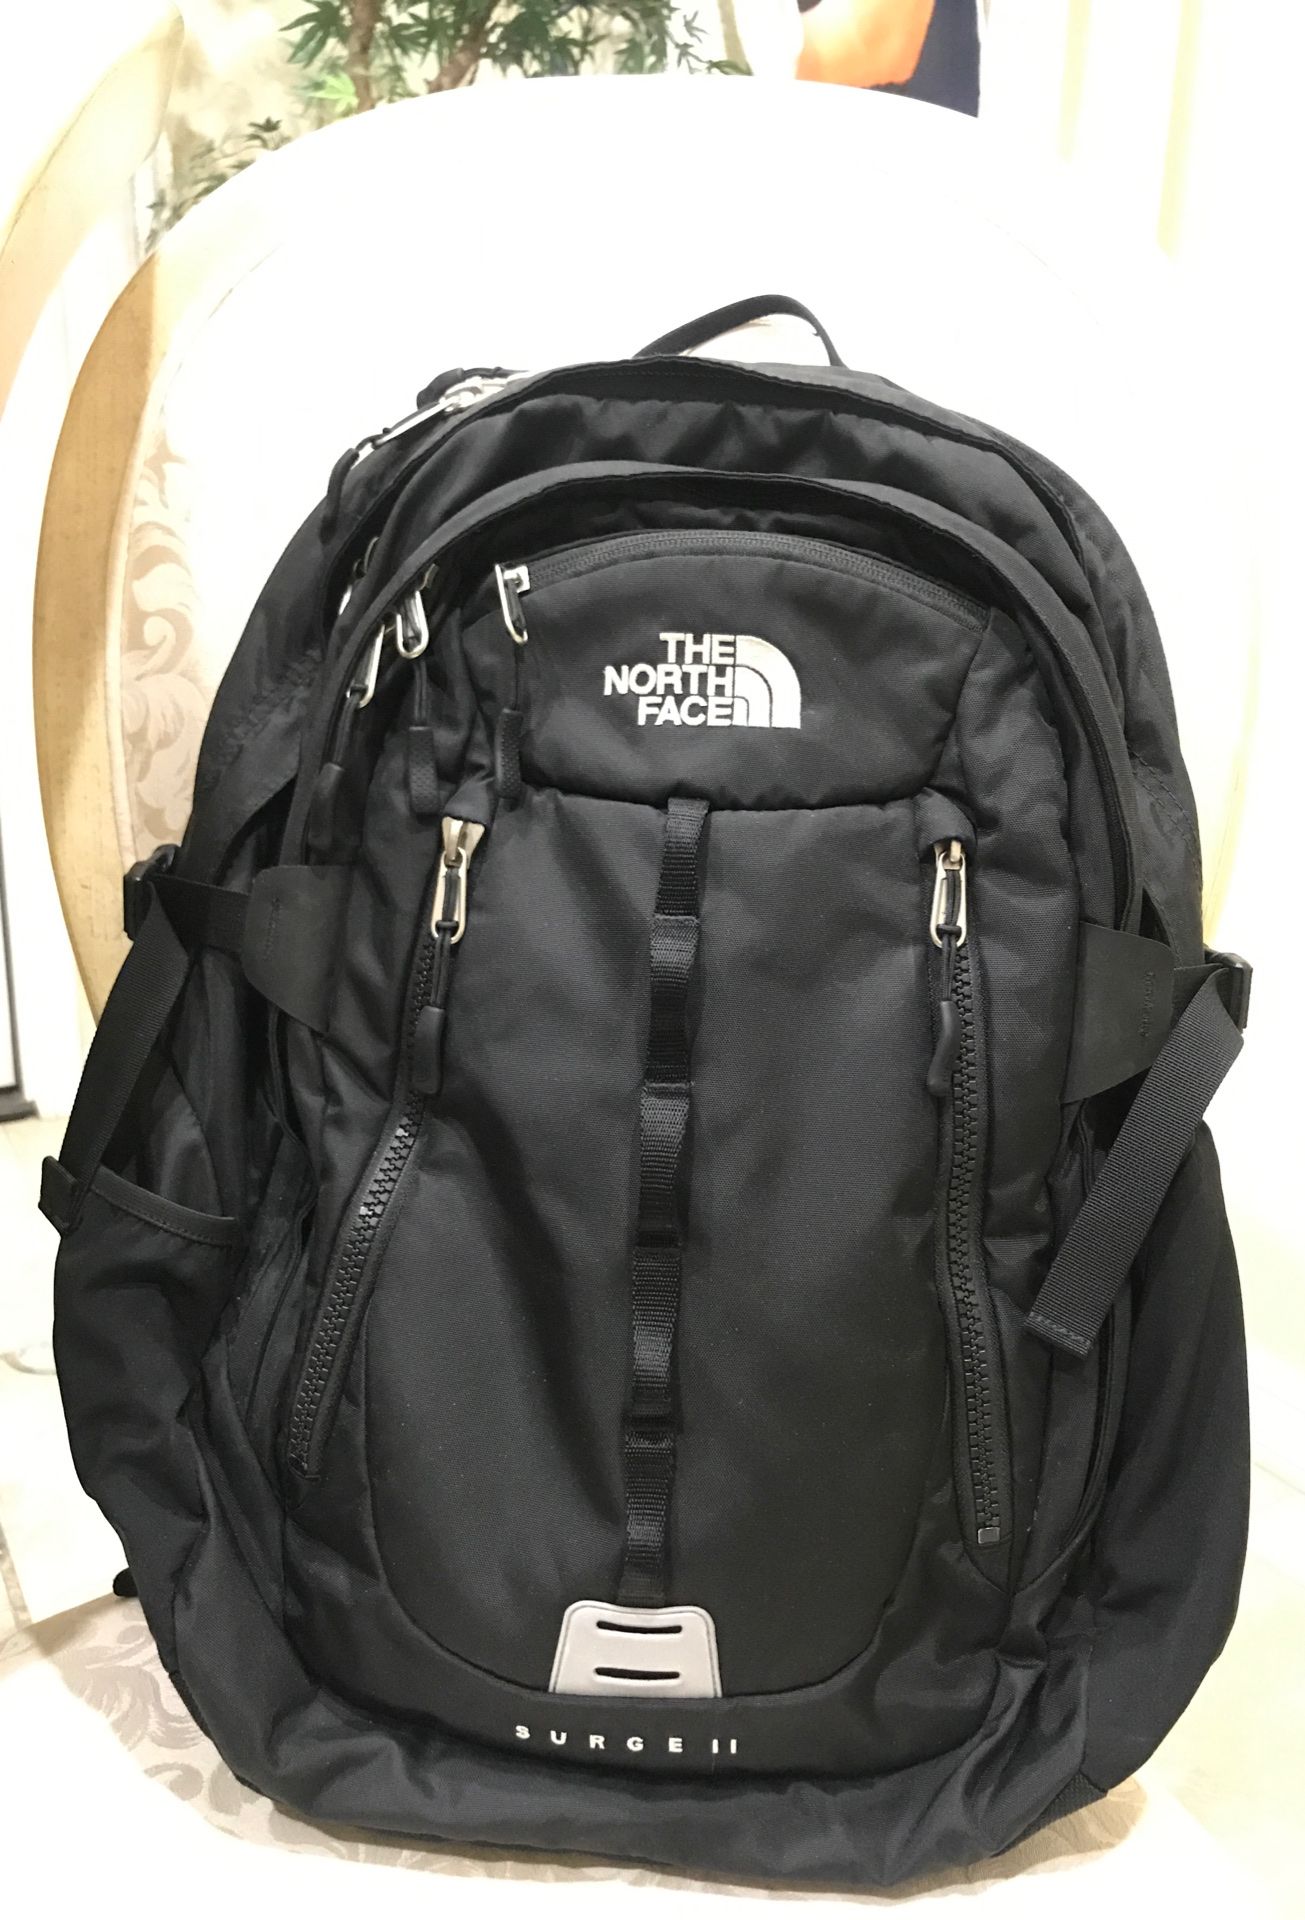 The Northface Surge II 2, 31L backpack